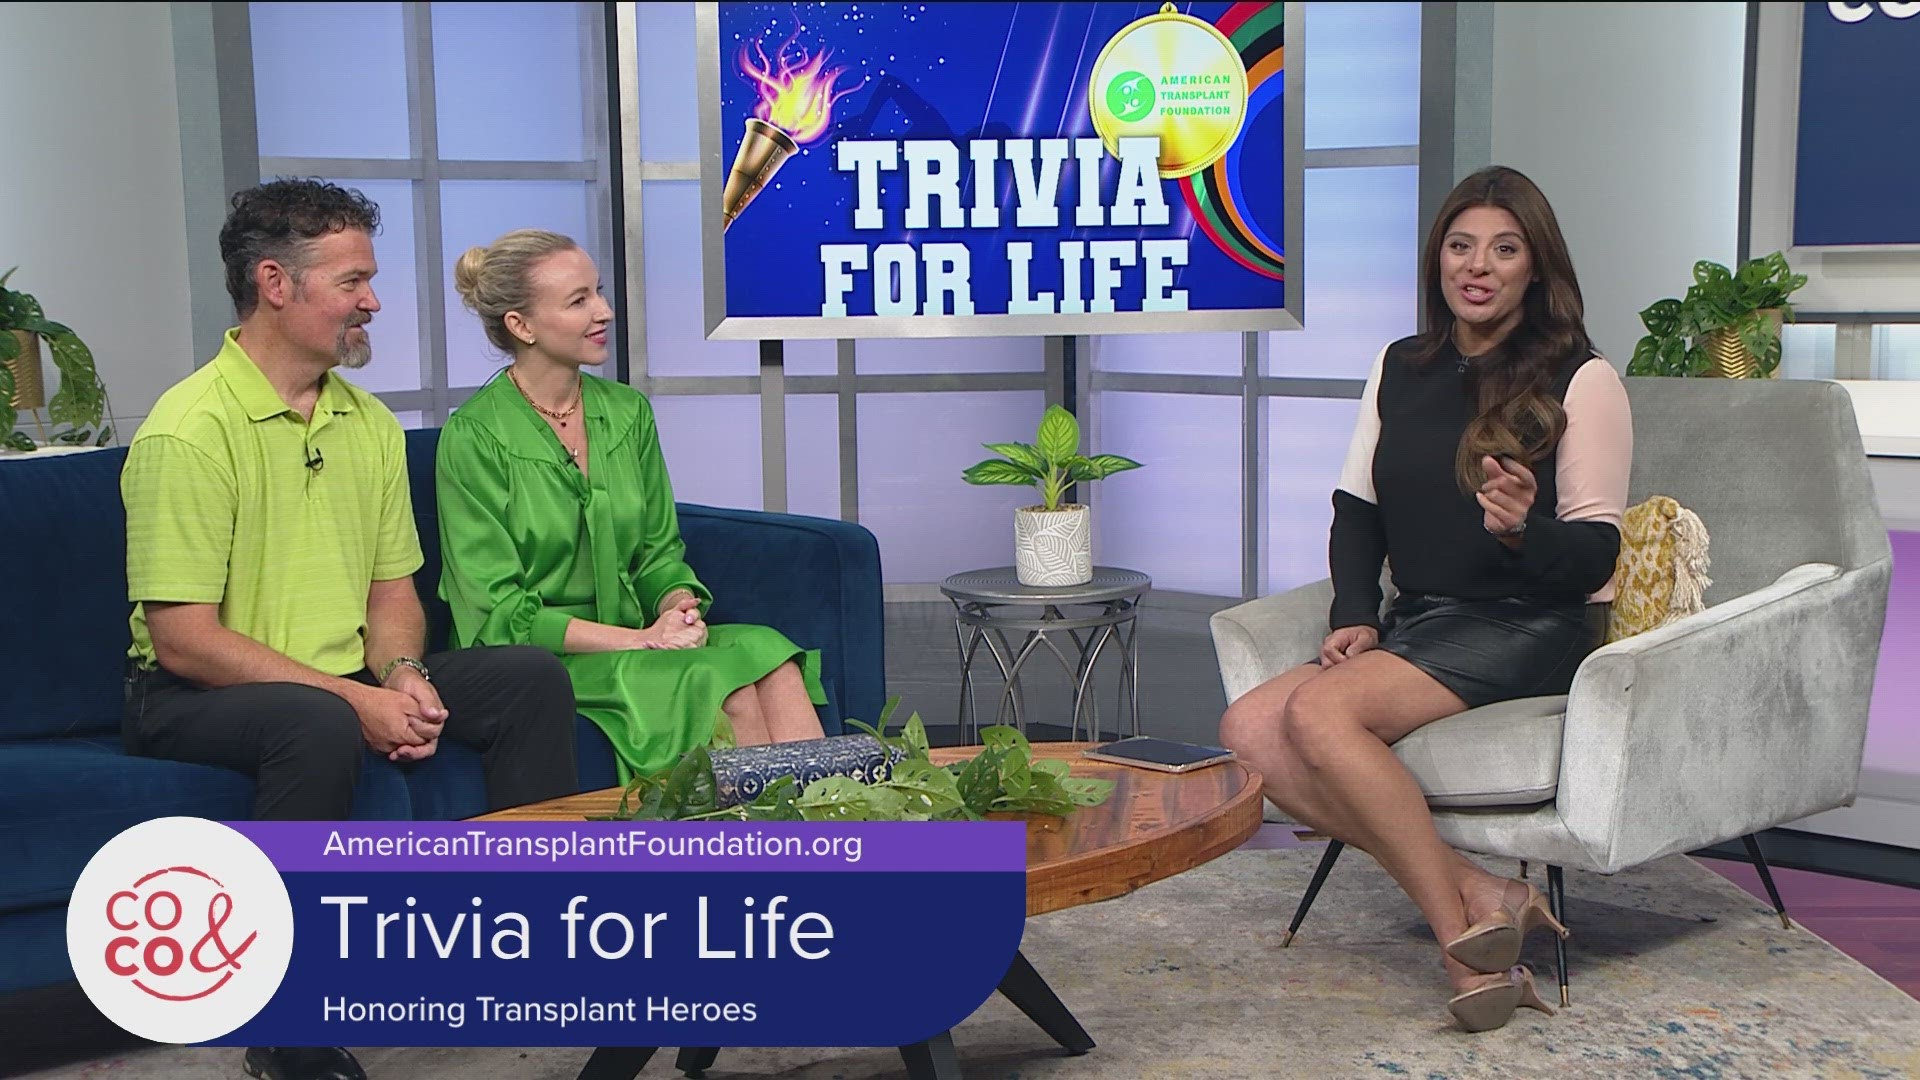 Don't miss your chance to mingle with Olympians, play trivia, and save lives. Learn more at Trivia4Life.org.